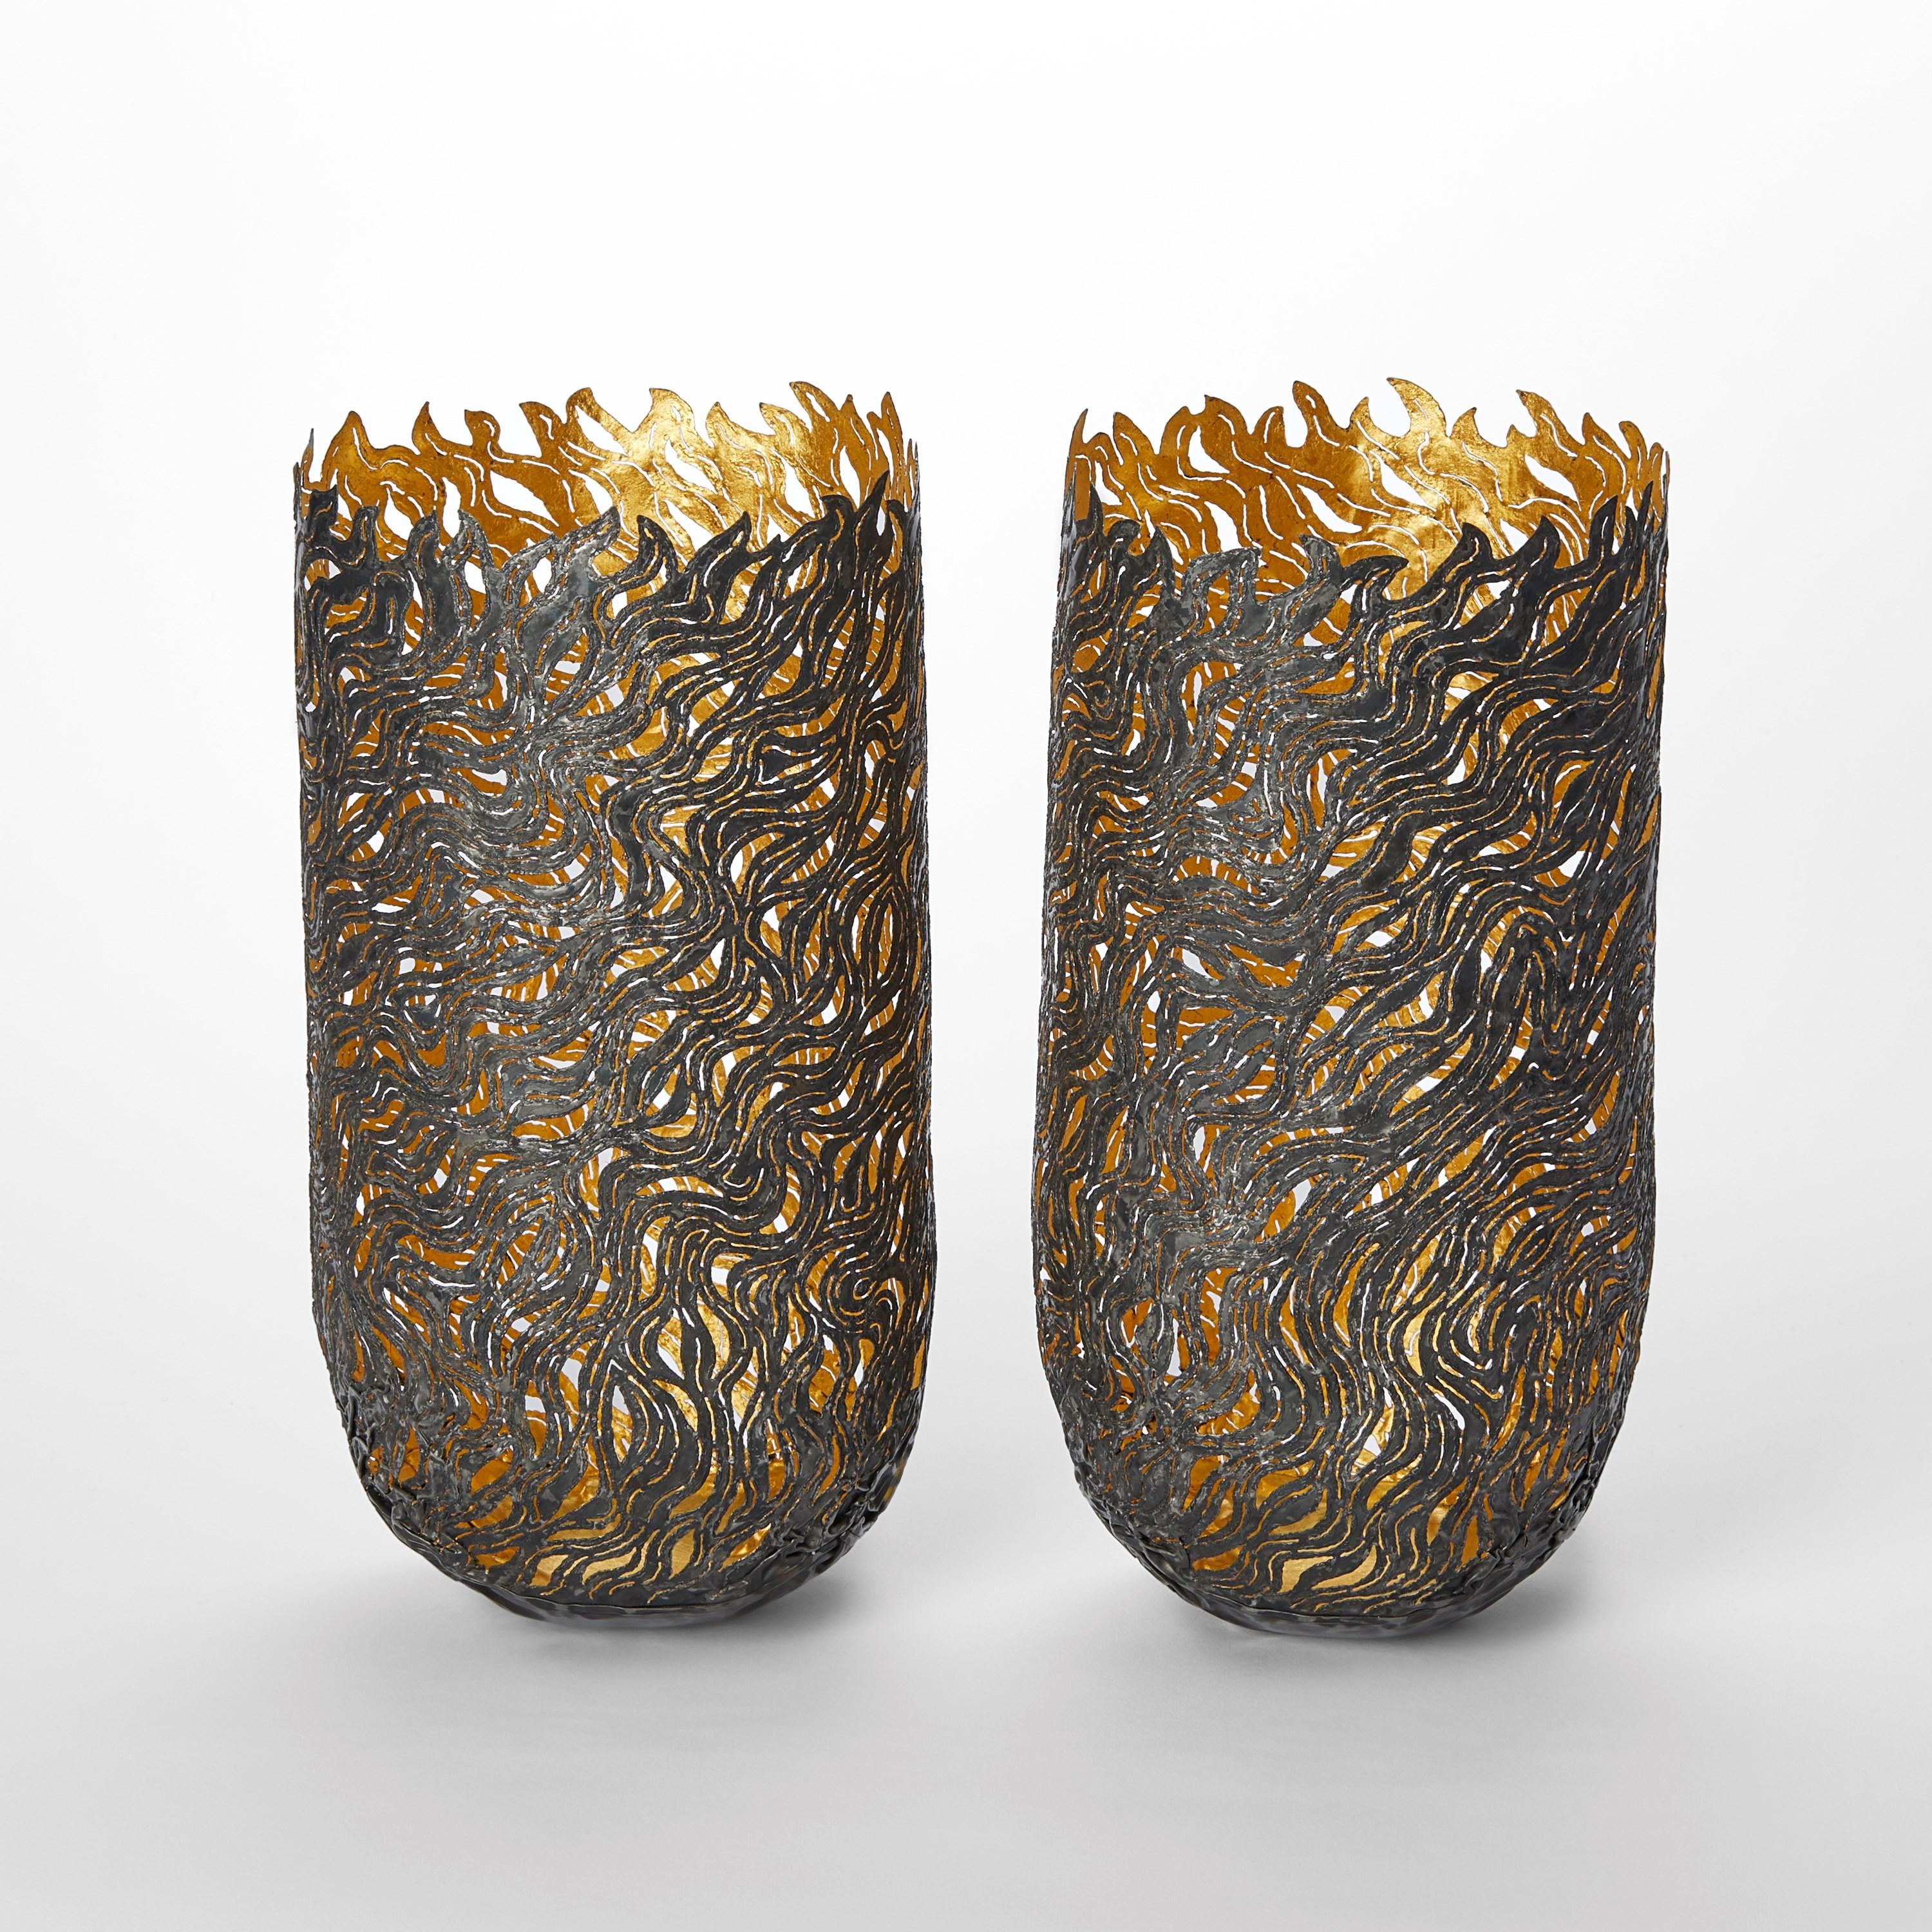 'Autumn Dance Vessels' are unique sculptural vessels by the British artist, Claire Malet, created from recycled and reformed steel cans with 24 ct fairmined gold leaf.

Price and dimensions shown per artwork.

Malet is an artist who works with